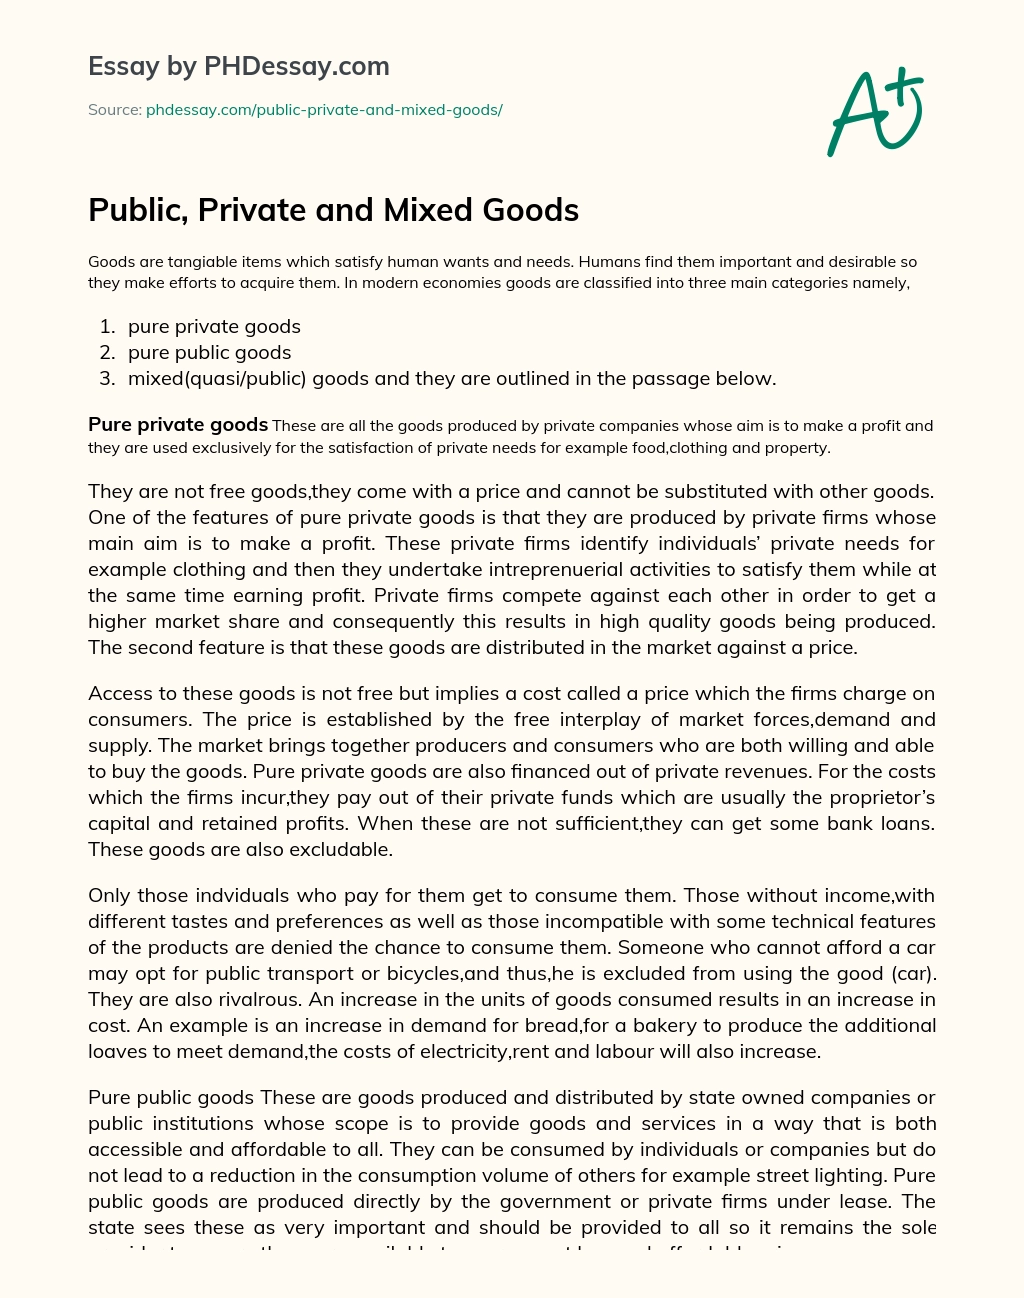 Public, Private and Mixed Goods essay